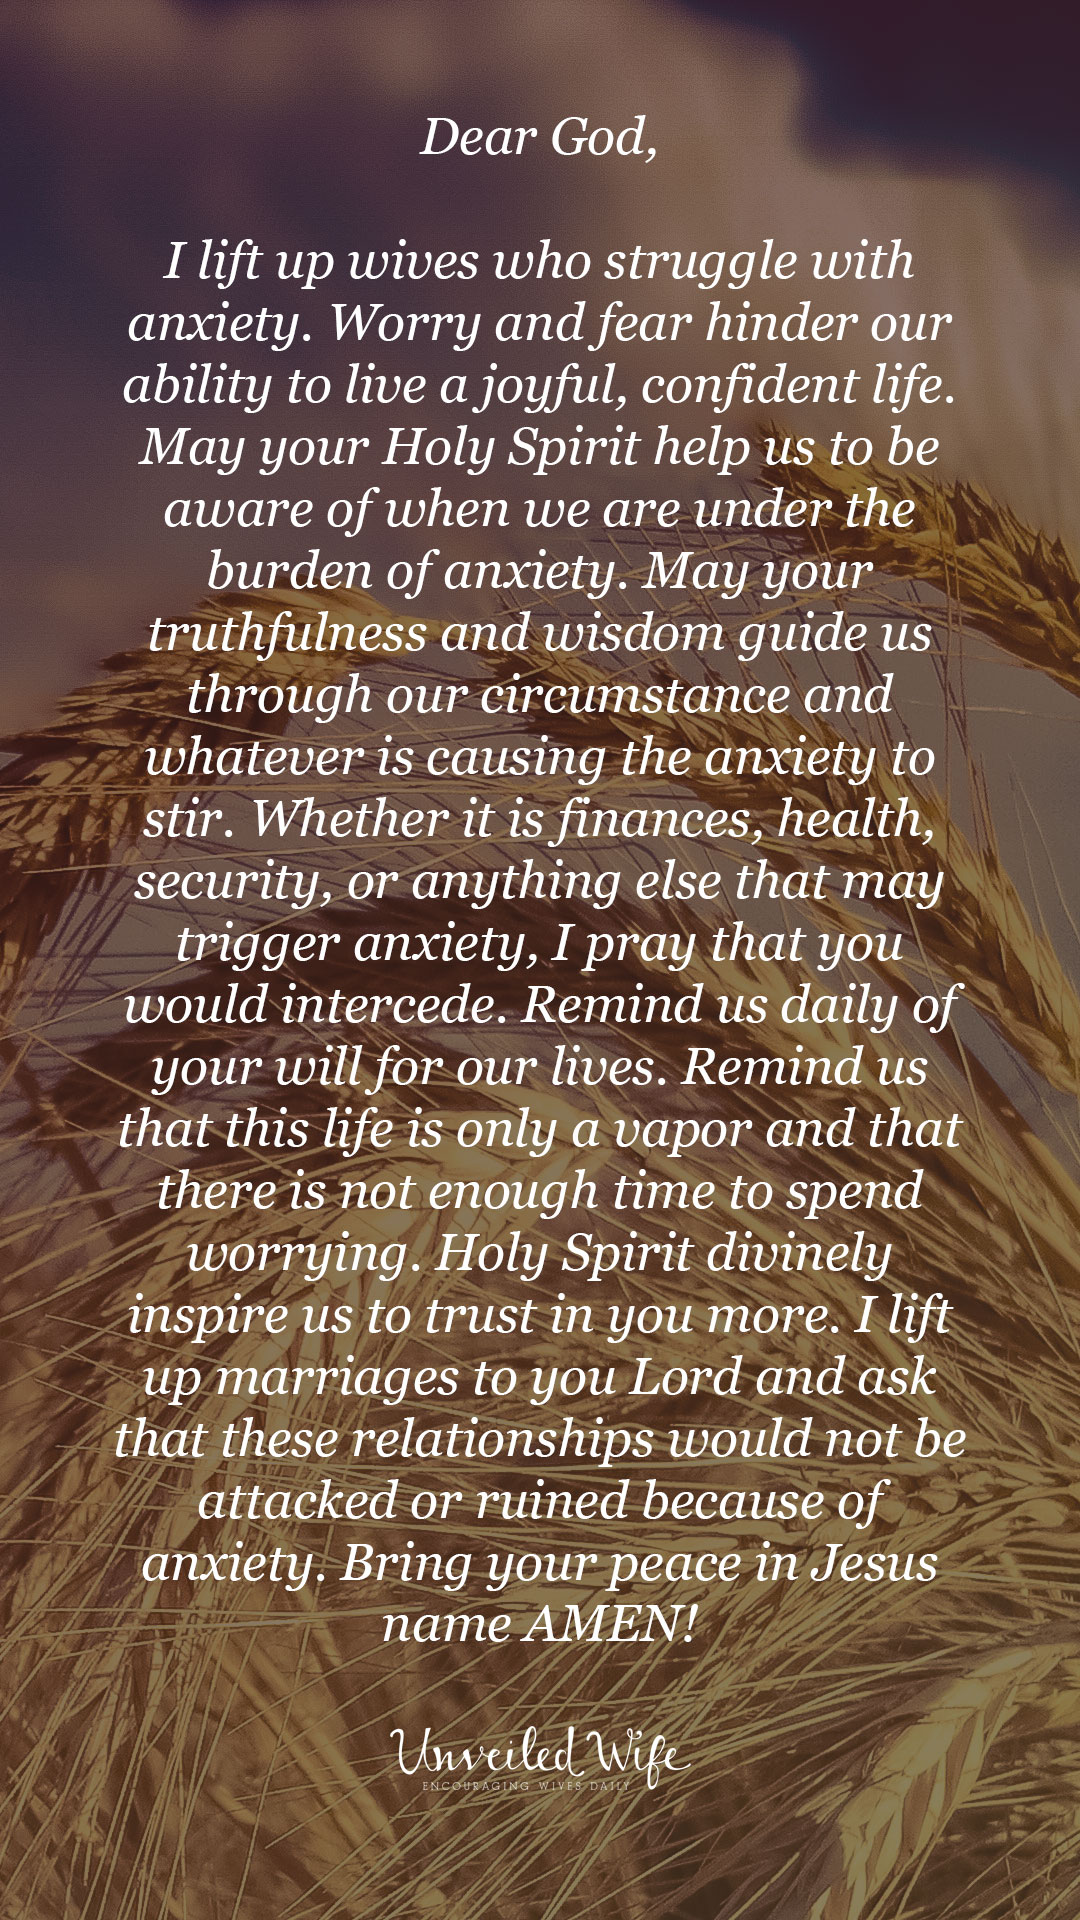 Prayer Of The Day : Wives With Anxiety